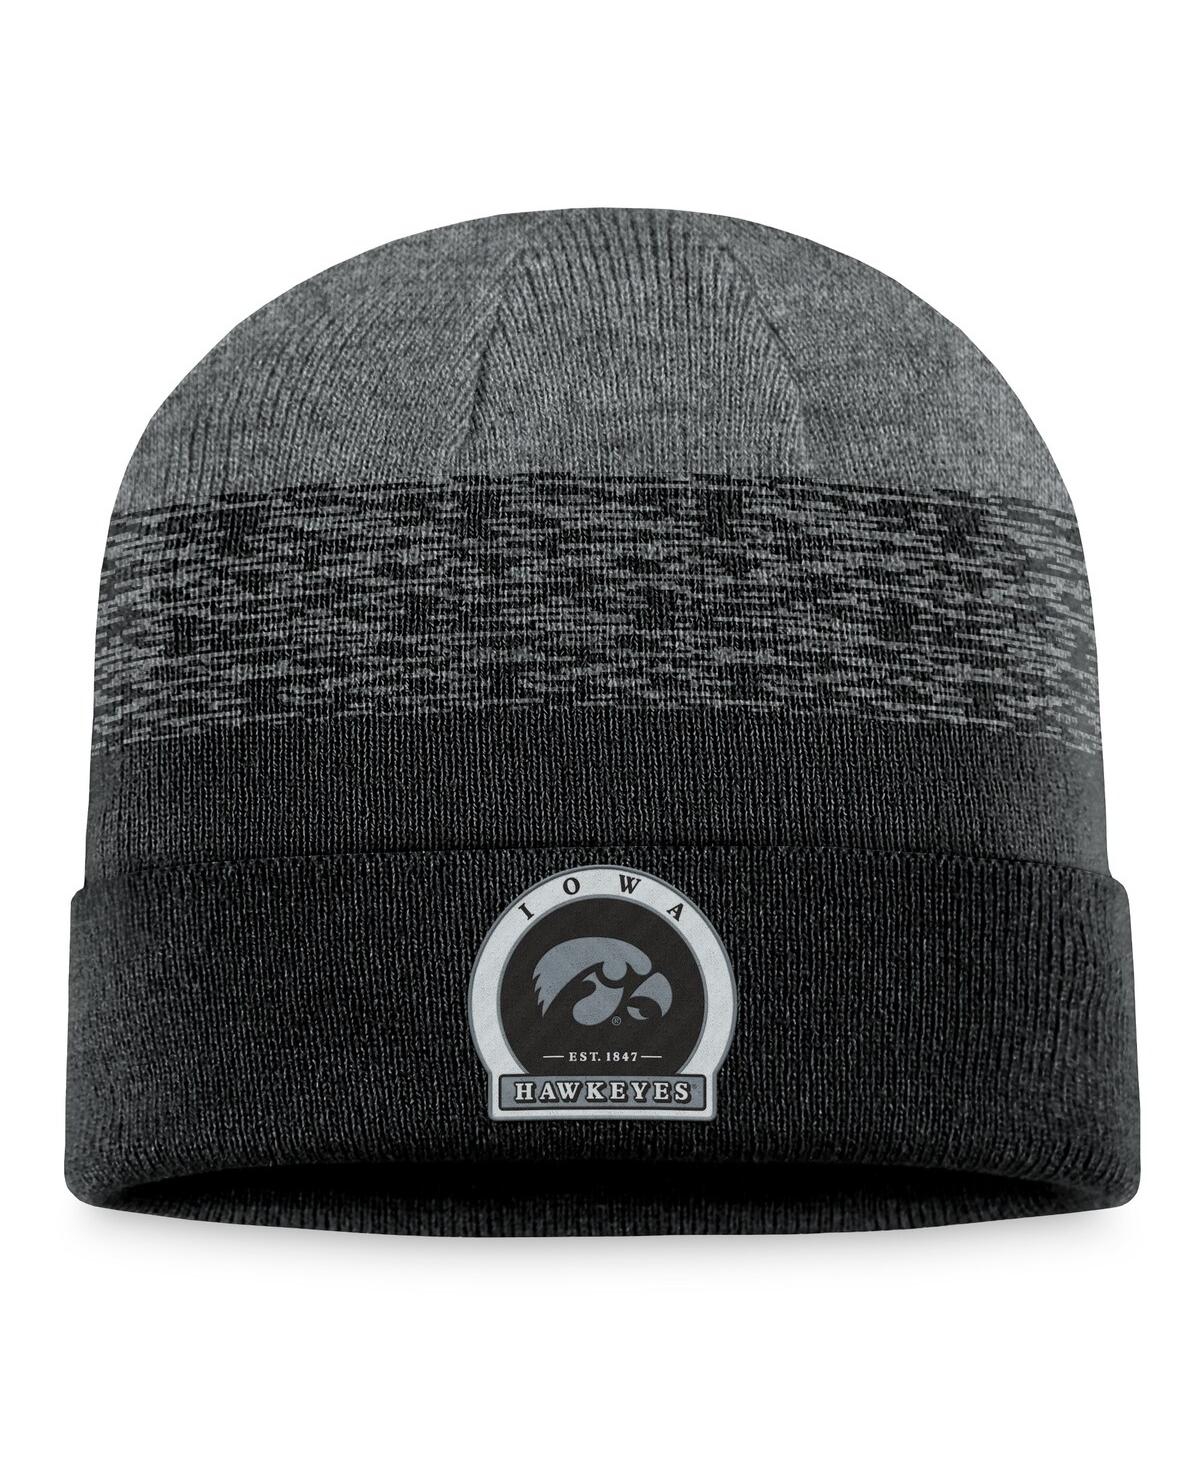 Top Of The World Men's  Heather Black Penn State Nittany Lions Frostbite Cuffed Knit Hat